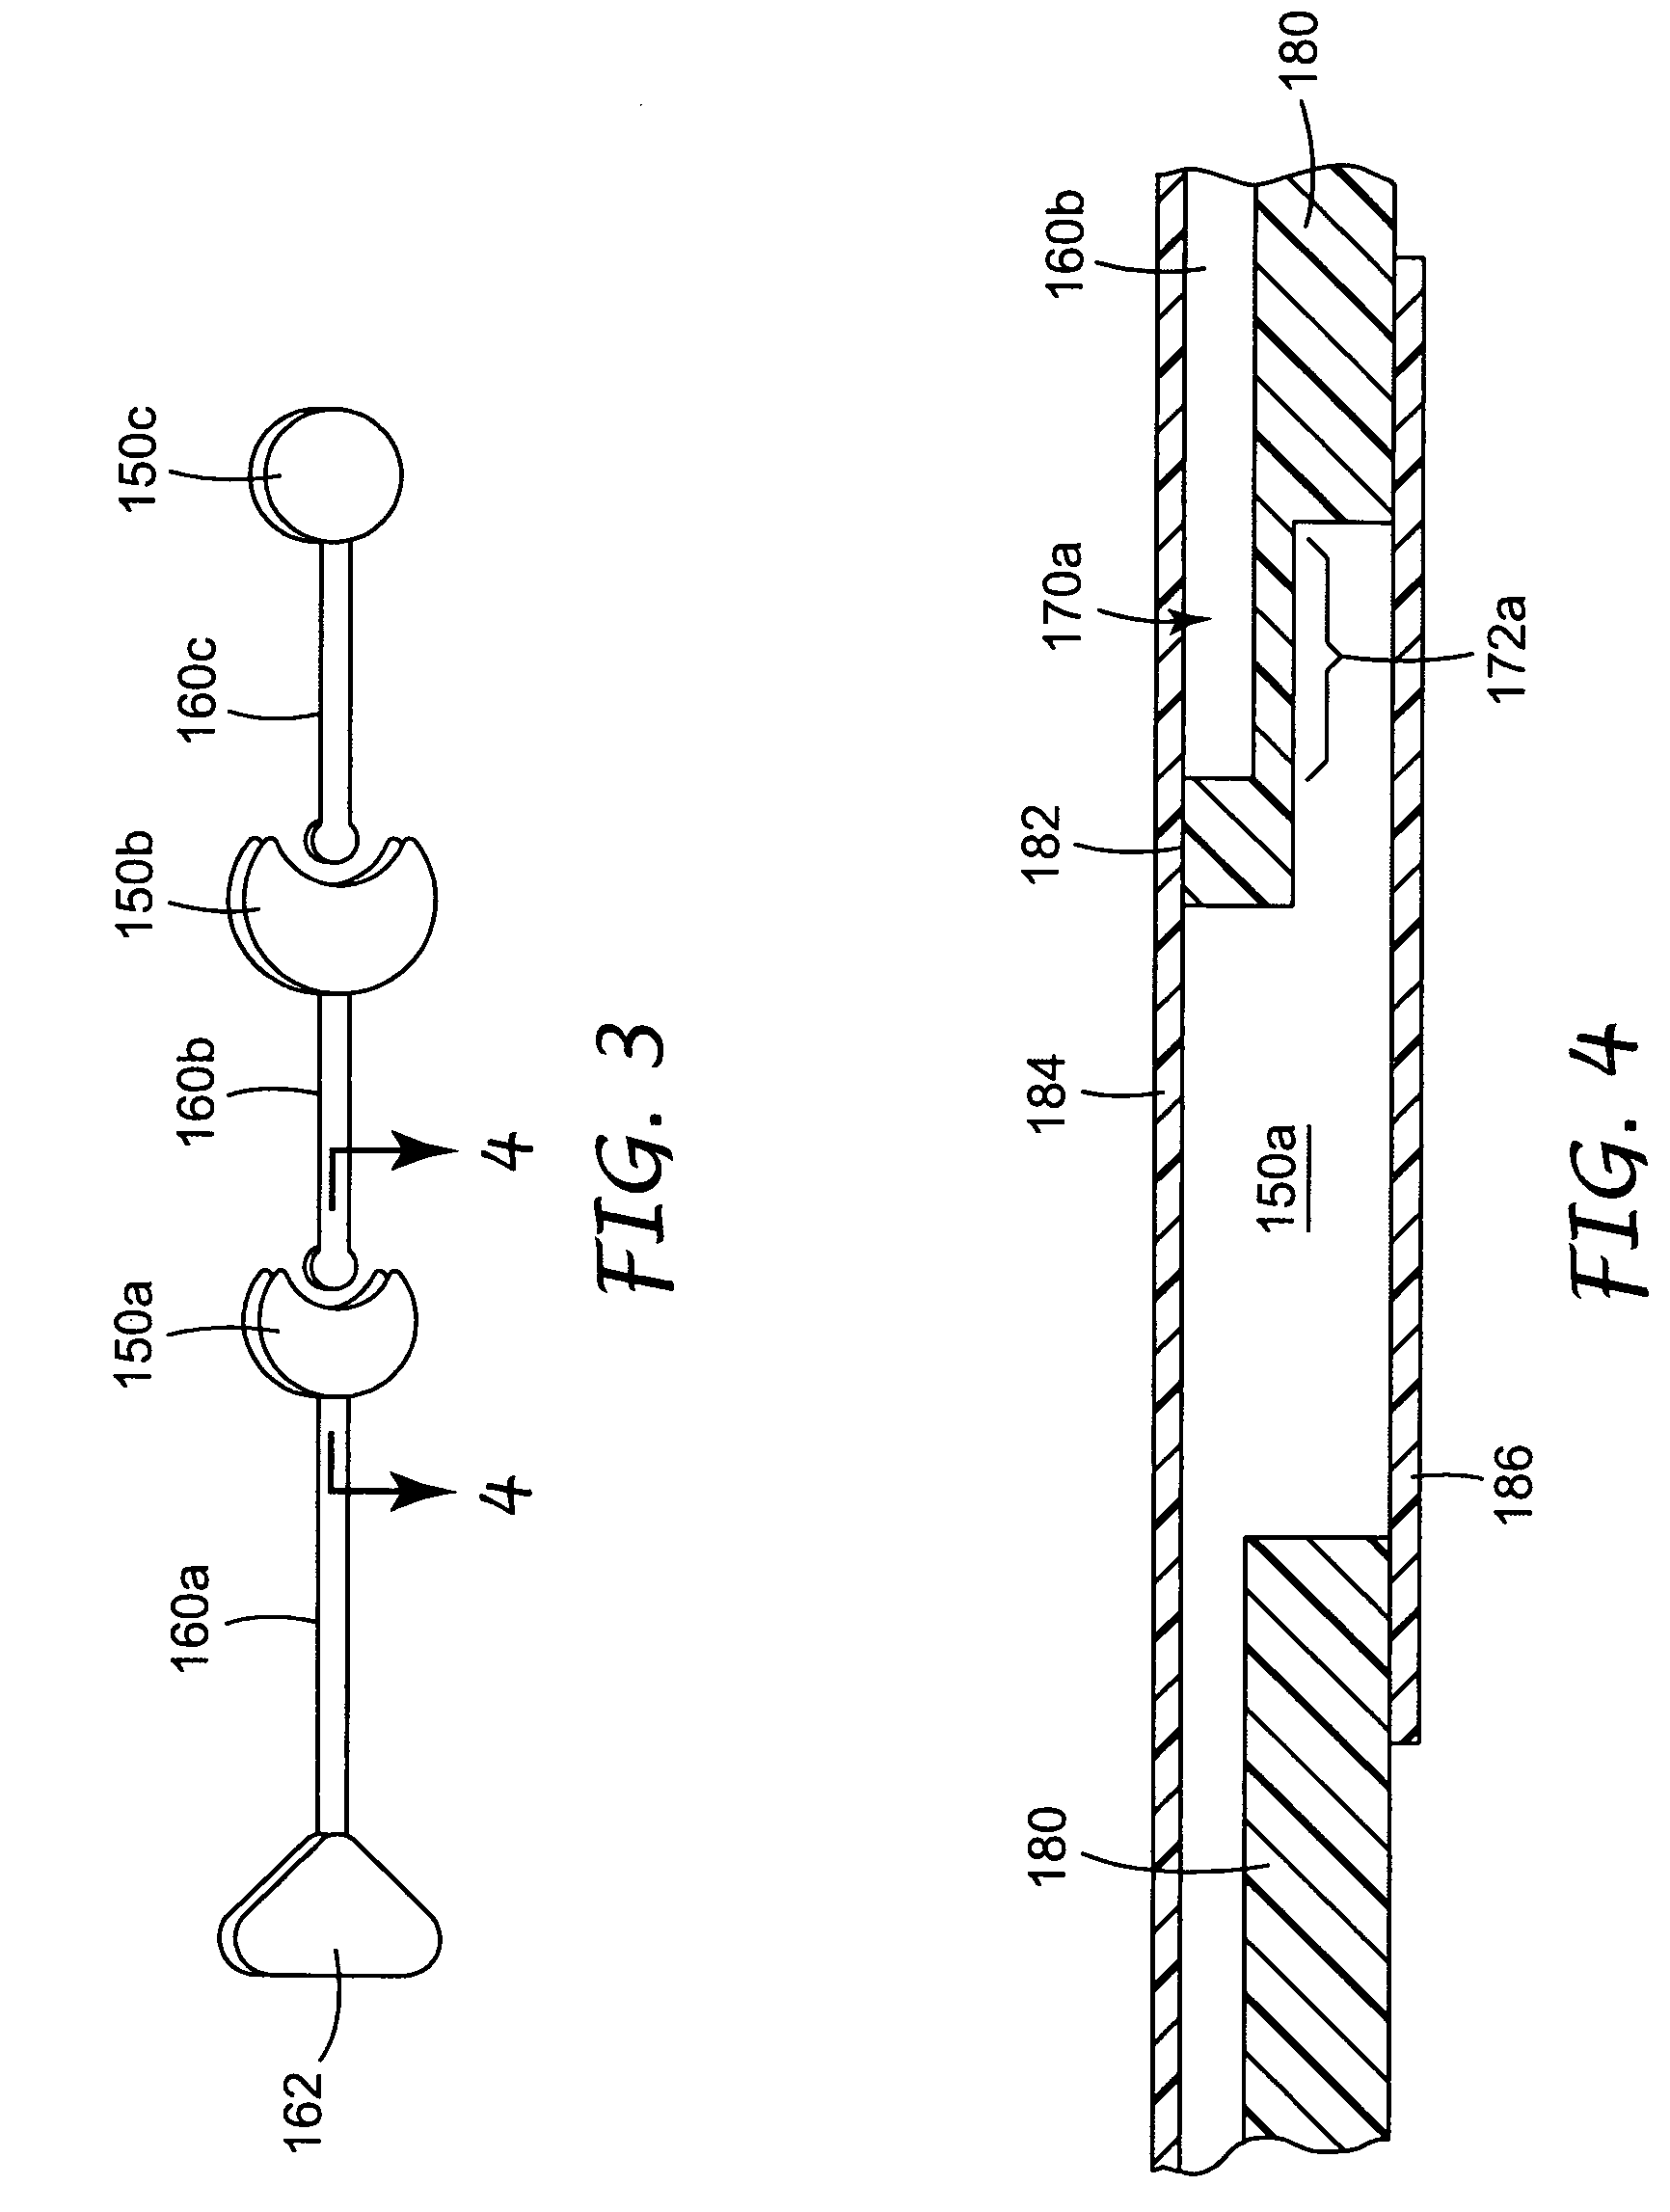 Methods and devices for removal of organic molecules from biological mixtures using anion exchange